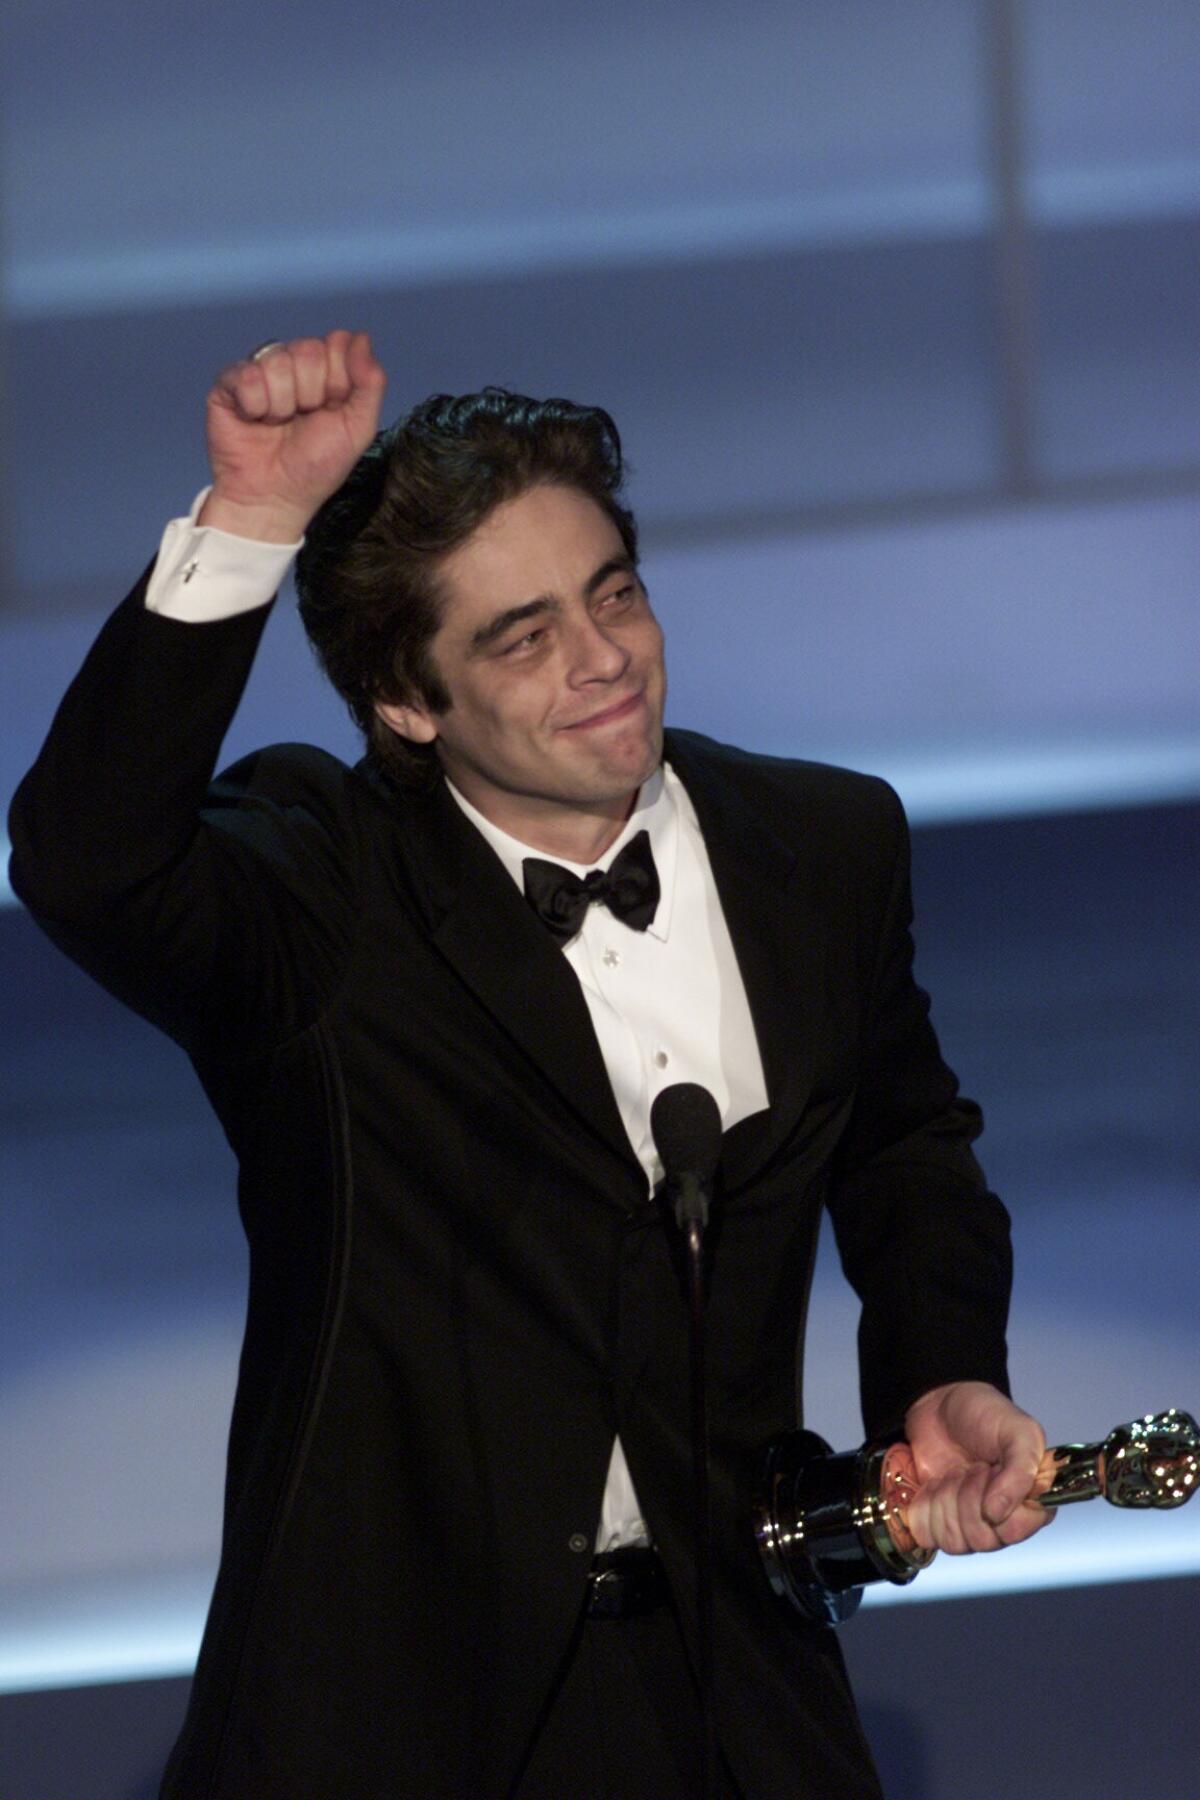 Benicio Del Toro accepts the supporting actor Oscar for his role in "Traffic" during the 73rd annual Academy Awards.